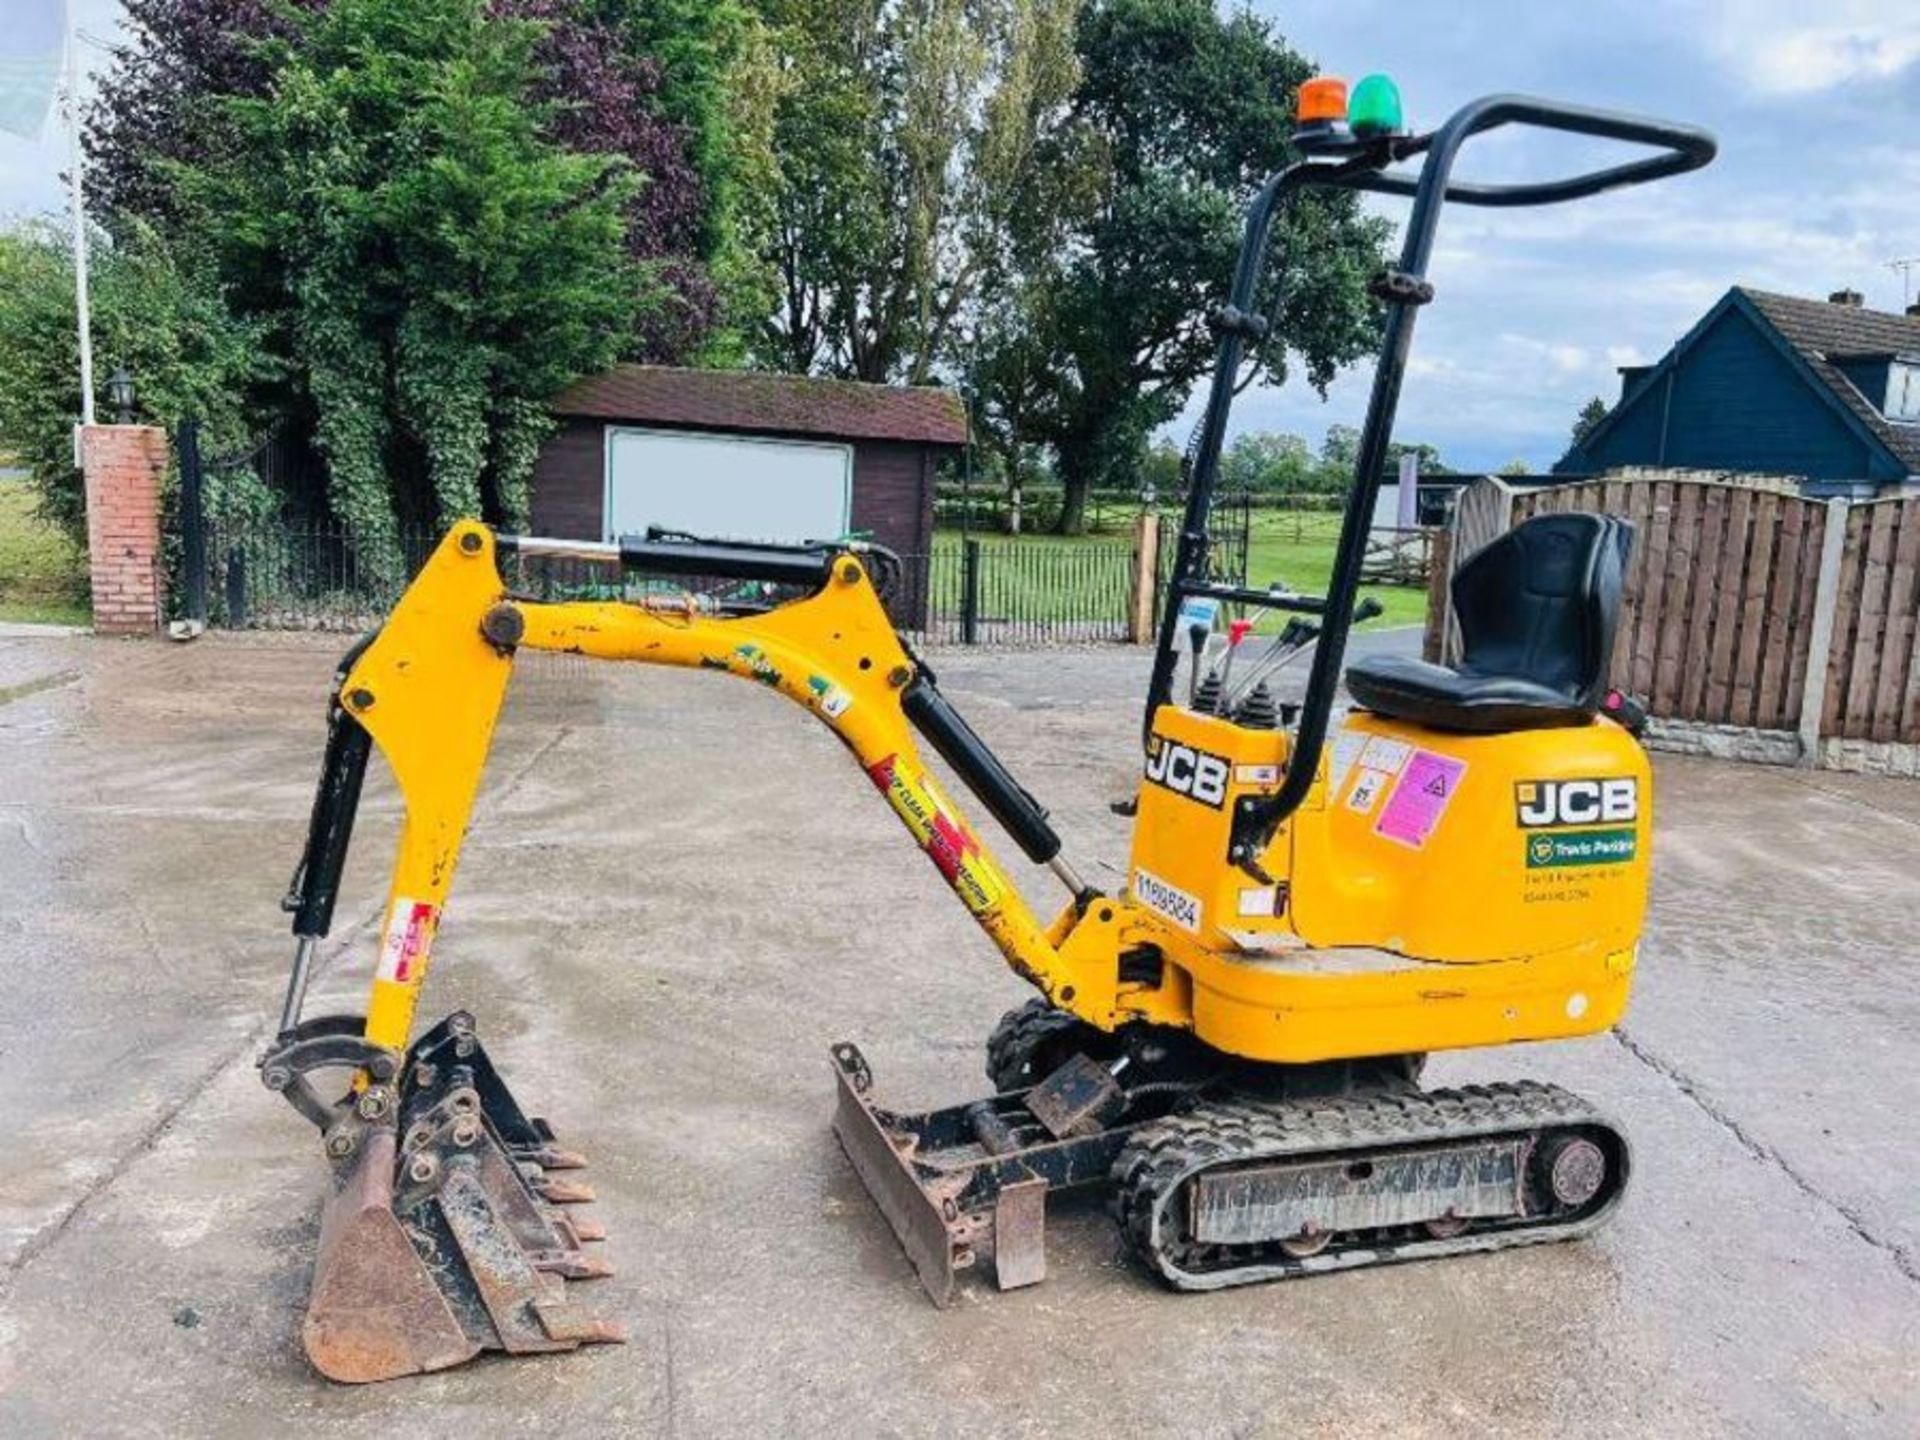 JCB MICRO DIGGER *YEAR 2019, ONLY 338 HOURS* C/W EXPANDING TRACKS